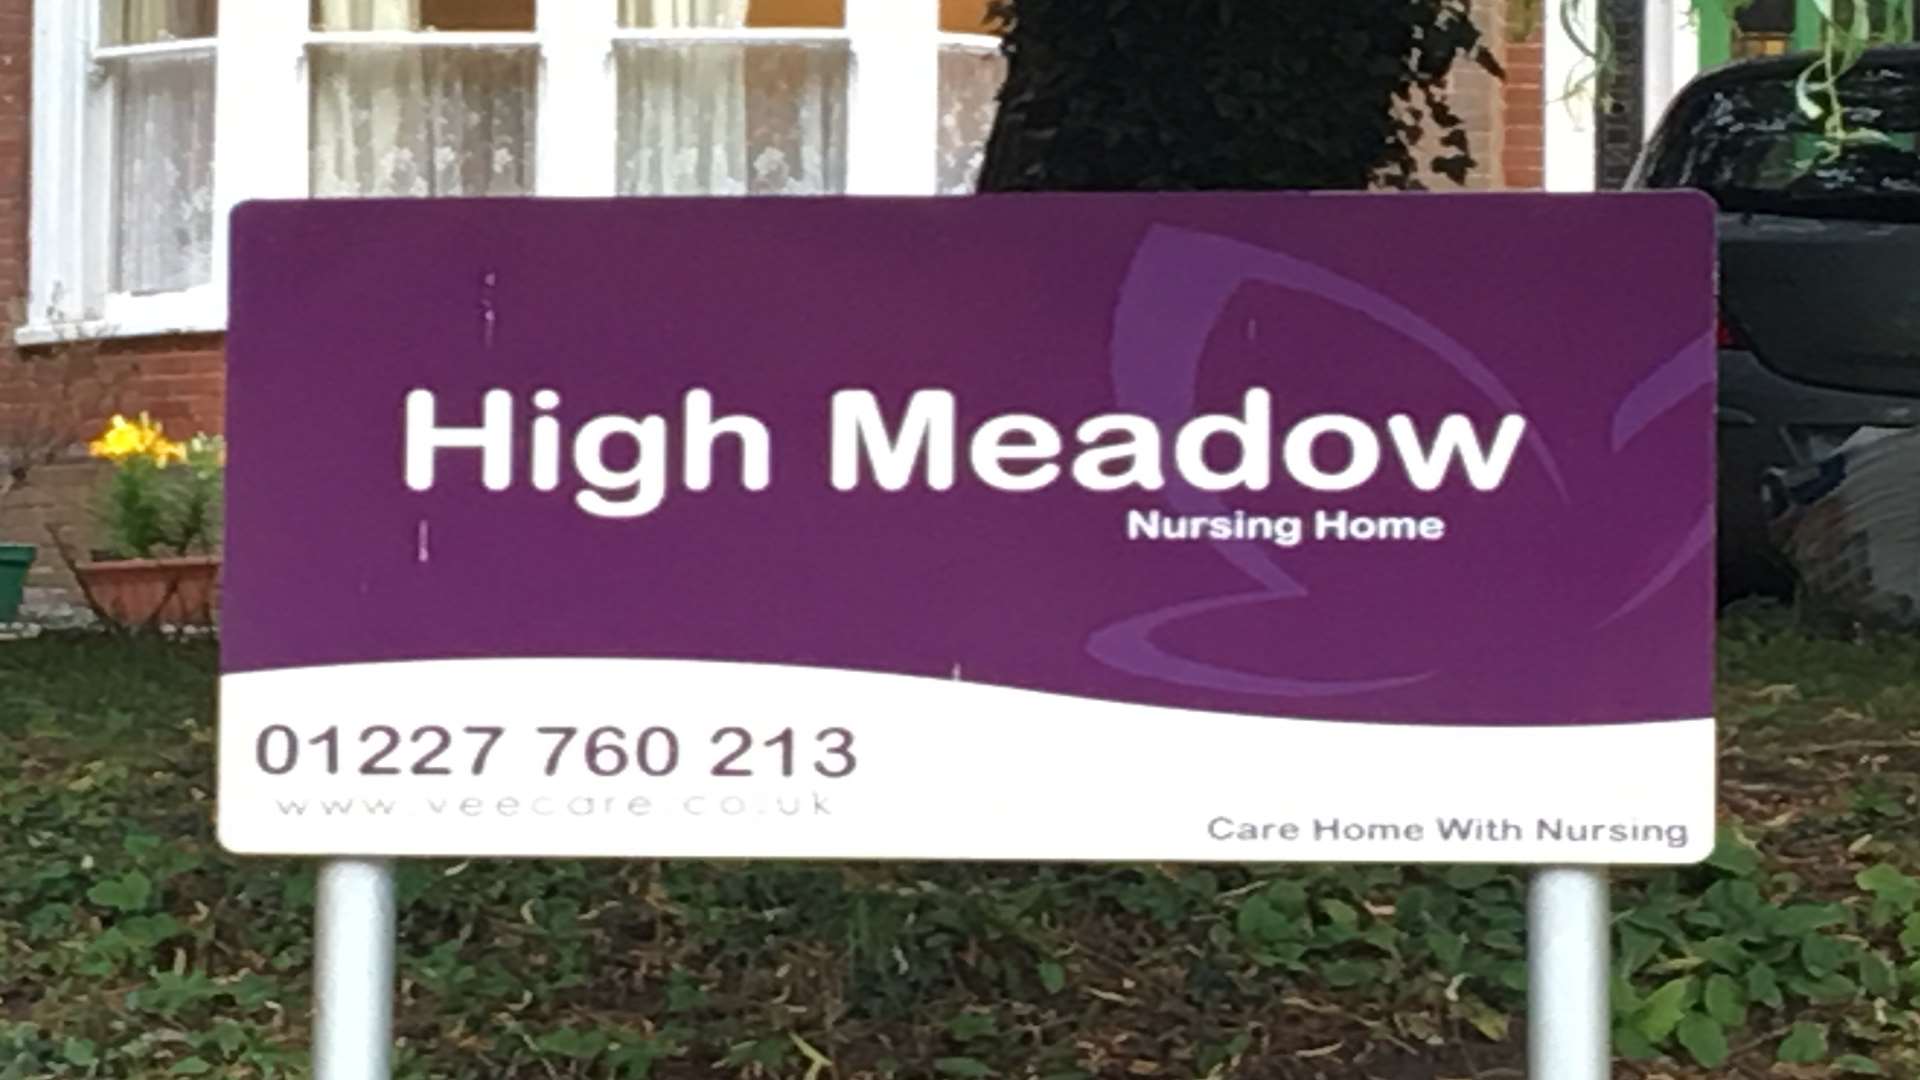 High Meadow Nursing Home has been rated inadequate by the Care Quality Commission